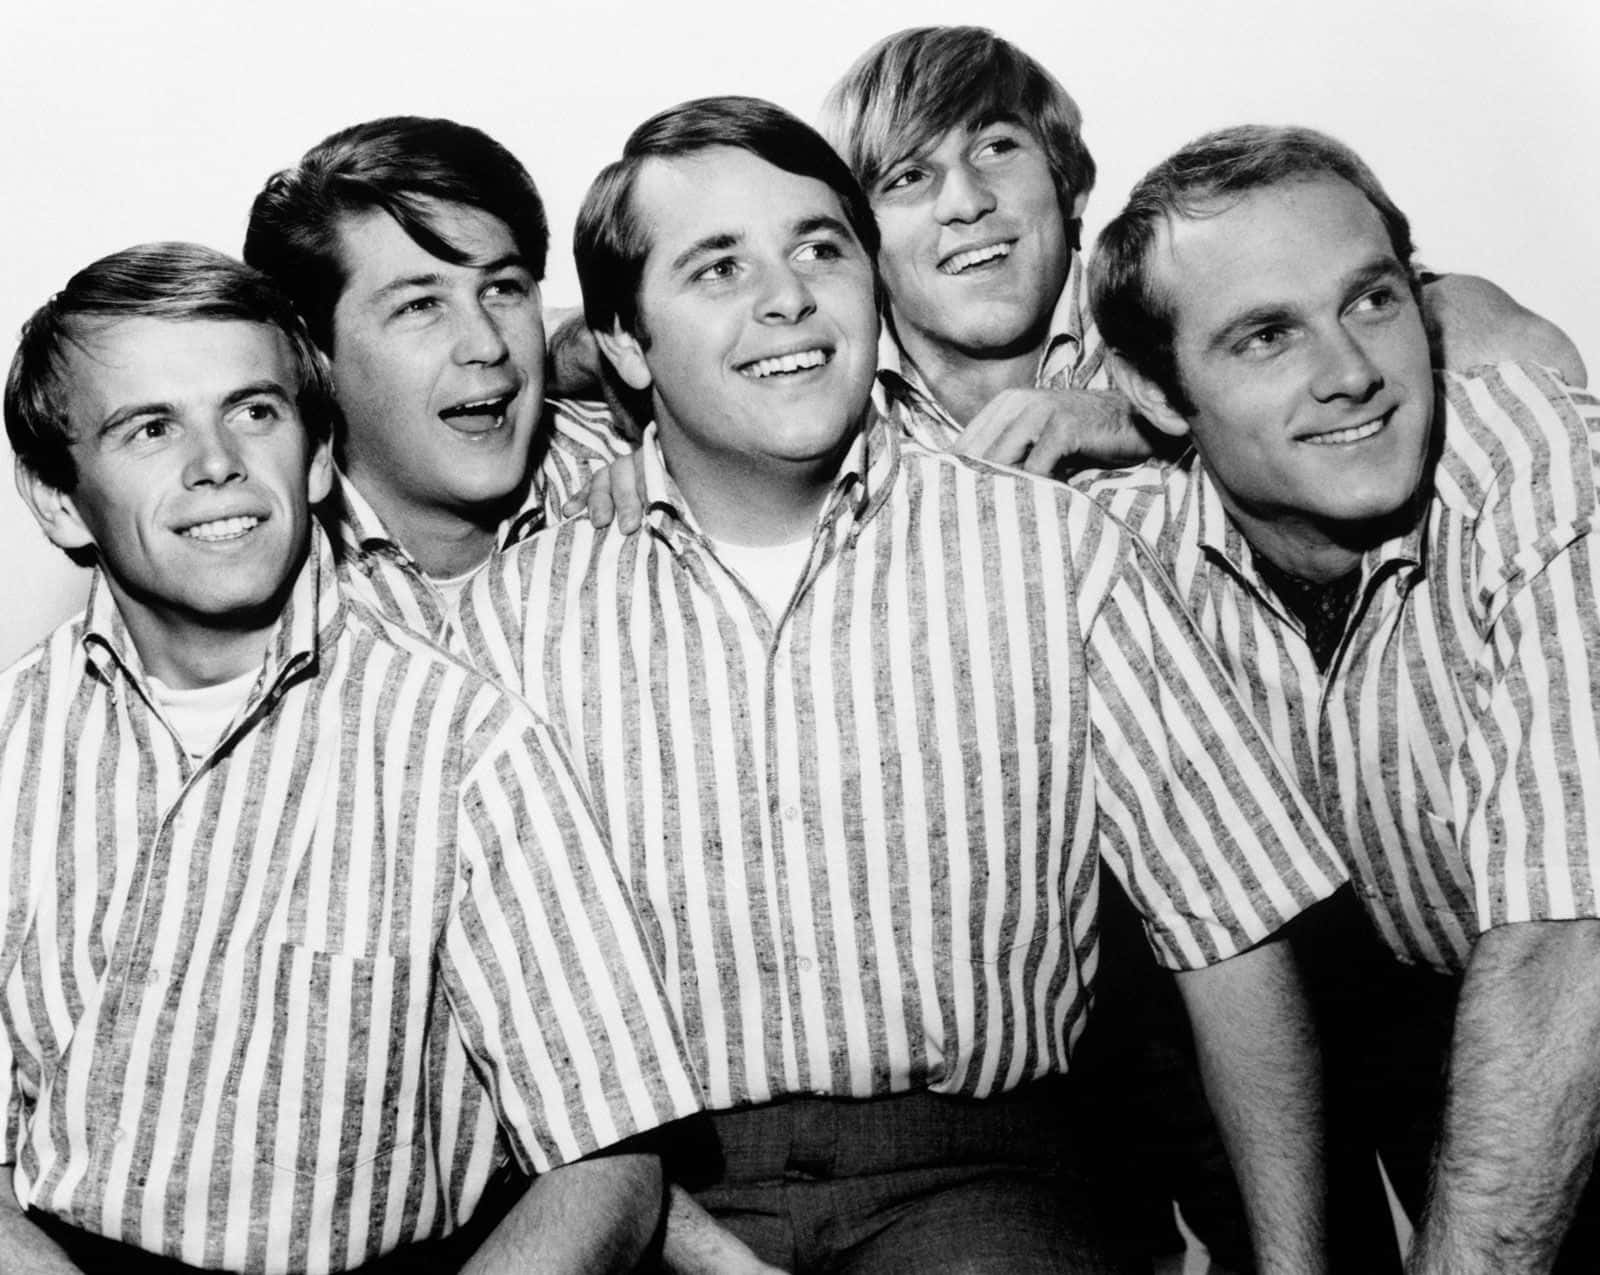 The Iconic Beach Boys Band in a Black and White Portrait Wallpaper